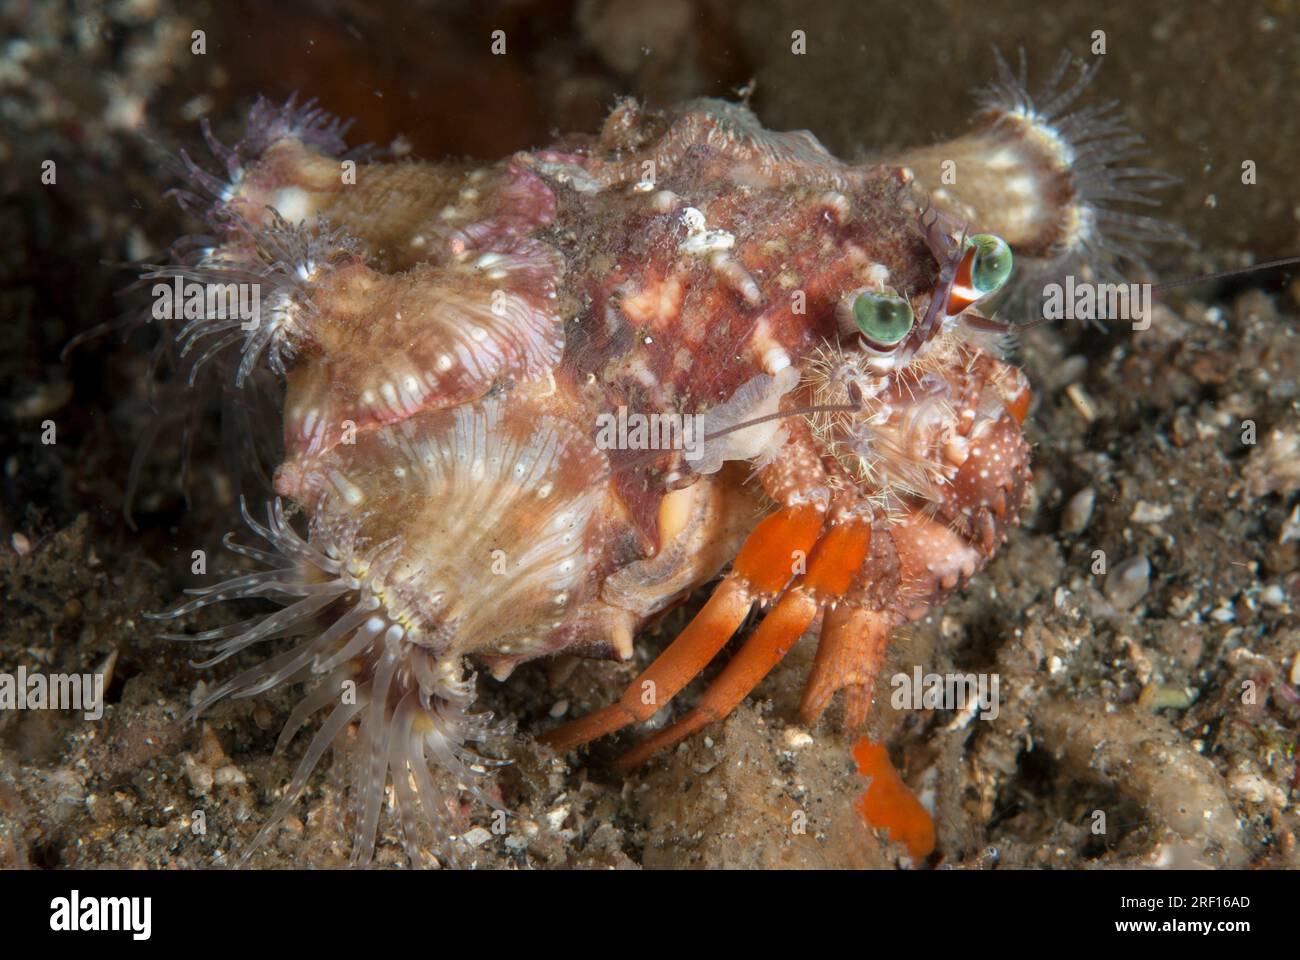 Anemone Hermit Crab, Dardanus pedunculatus, with Sea Anemones, Calliactis polypus, on shell for camouflage and protection, night dive, Nudi Falls dive Stock Photo